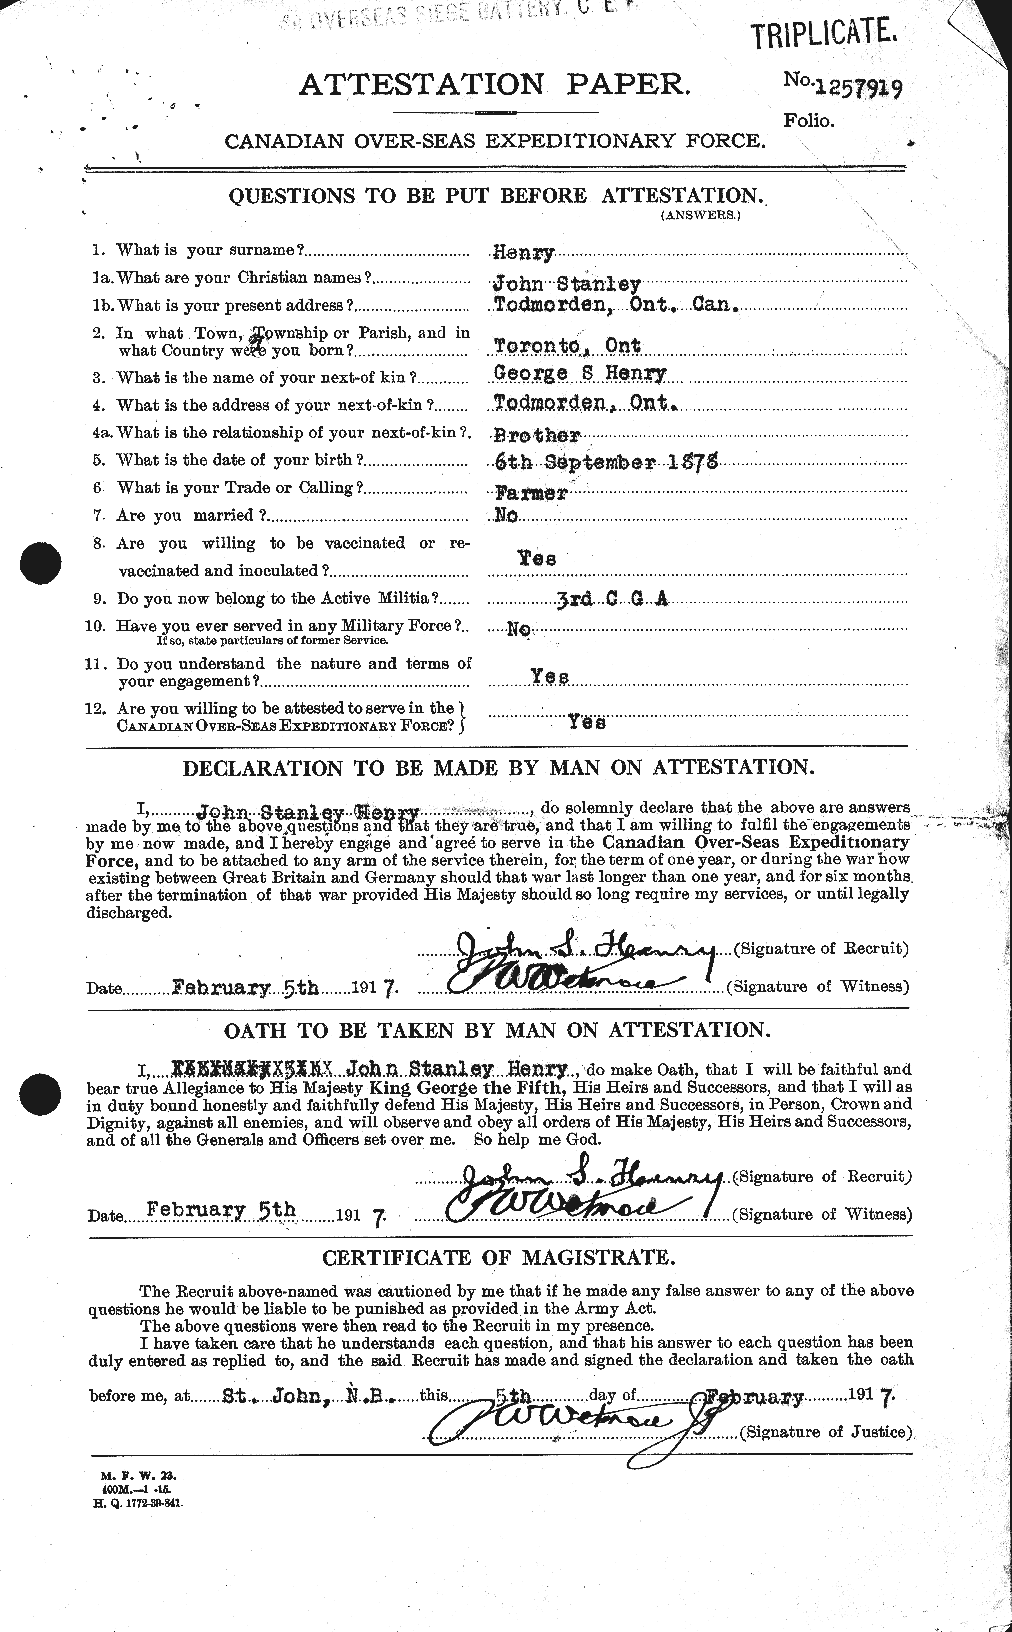 Personnel Records of the First World War - CEF 387632a